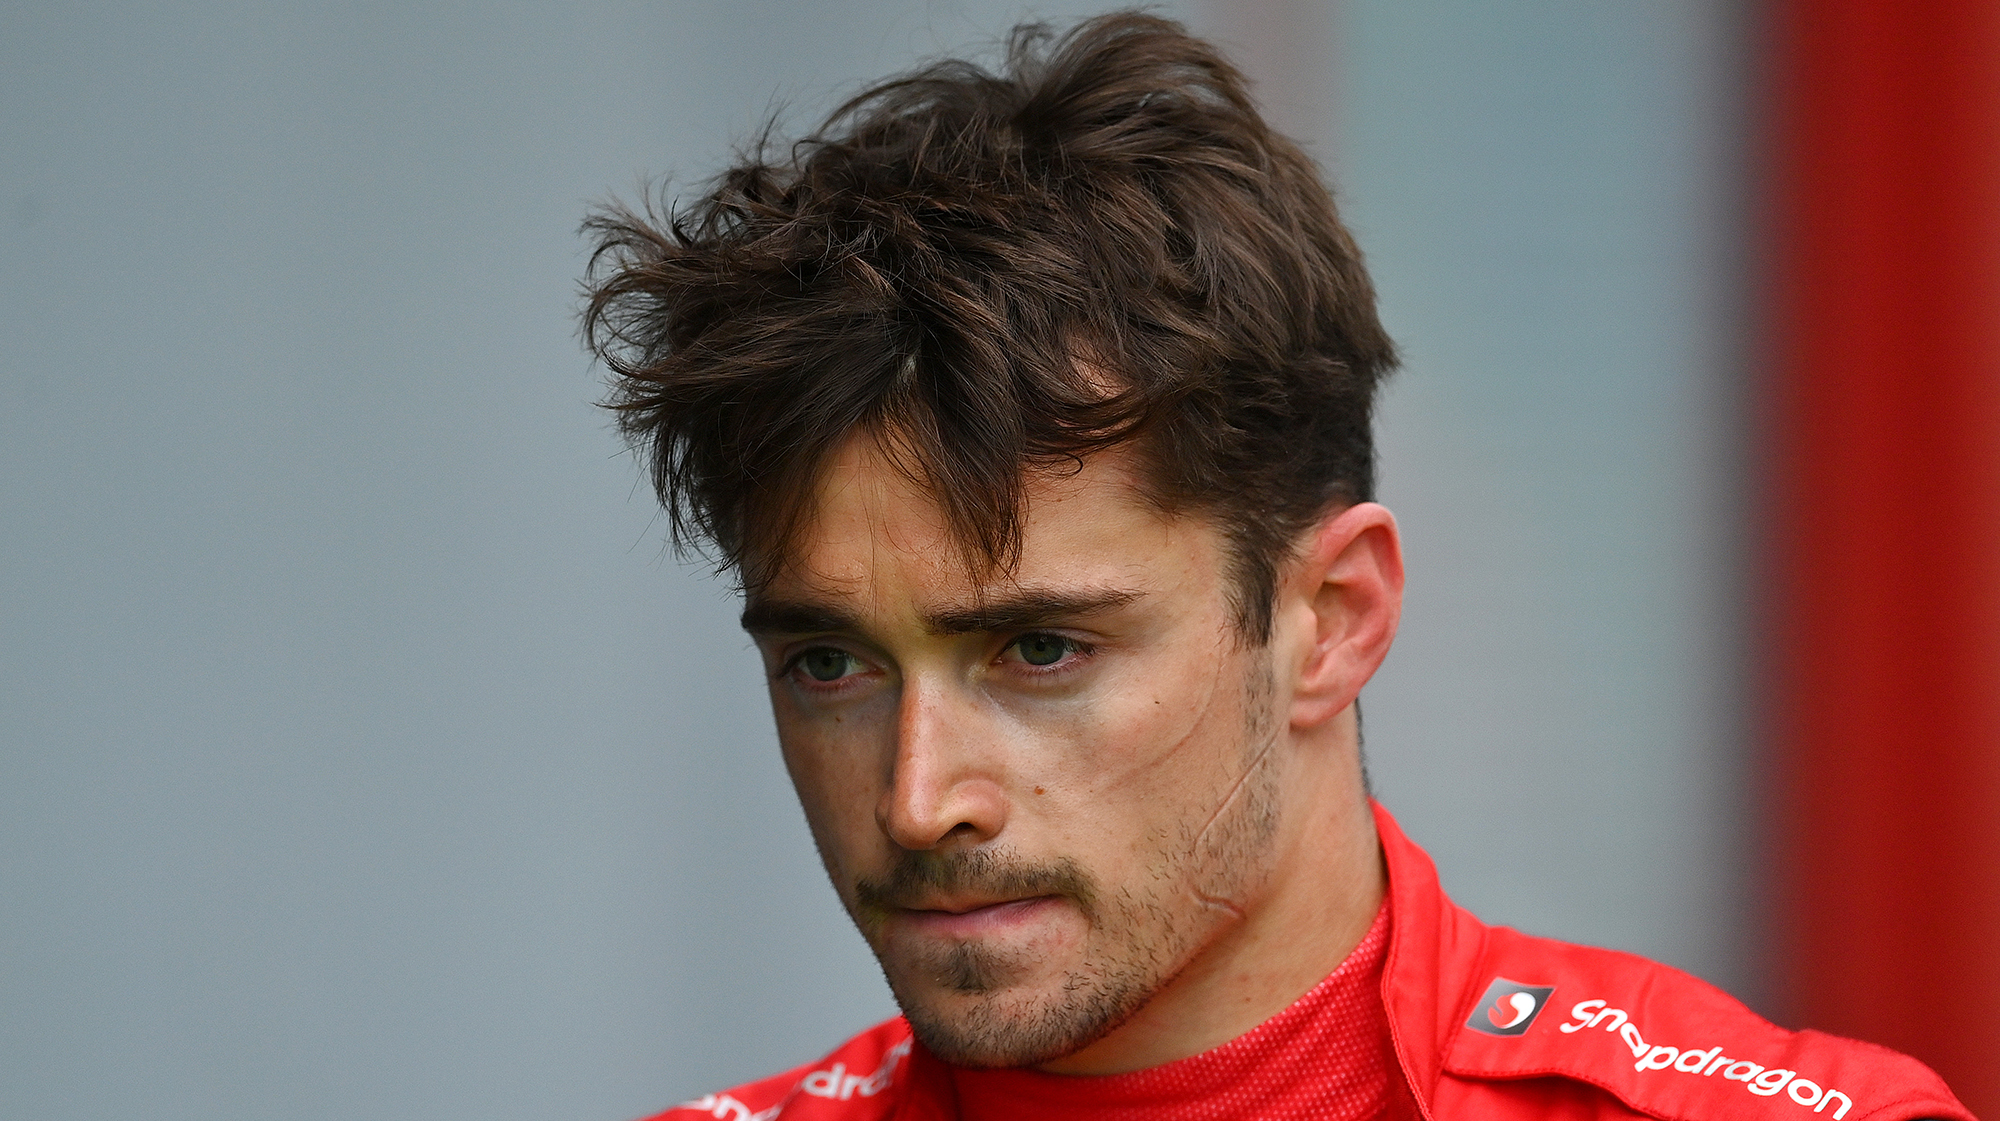 6th placed Charles Leclerc of Monaco and Ferrari looks dejected in parc ferme after spinning out from third position with 10 laps remaining during the F1 Grand Prix of Emilia Romagna at Autodromo Enzo e Dino Ferrari on April 24, 2022 in Imola, Italy.